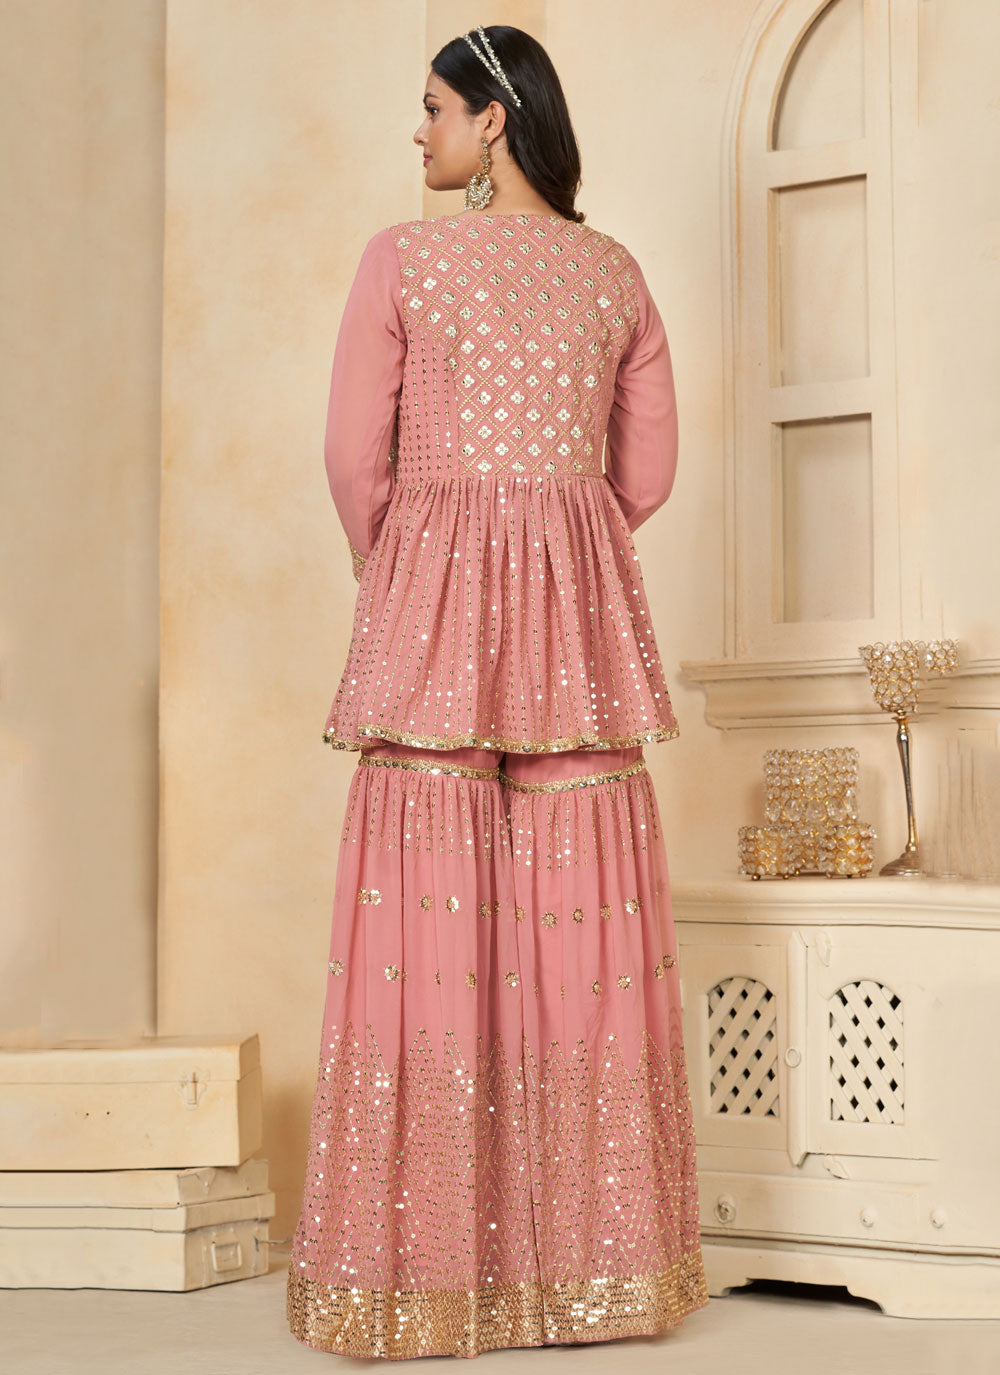 Pink Faux Georgette Salwar Suit With Cord, Sequins, Thread And Zari Work